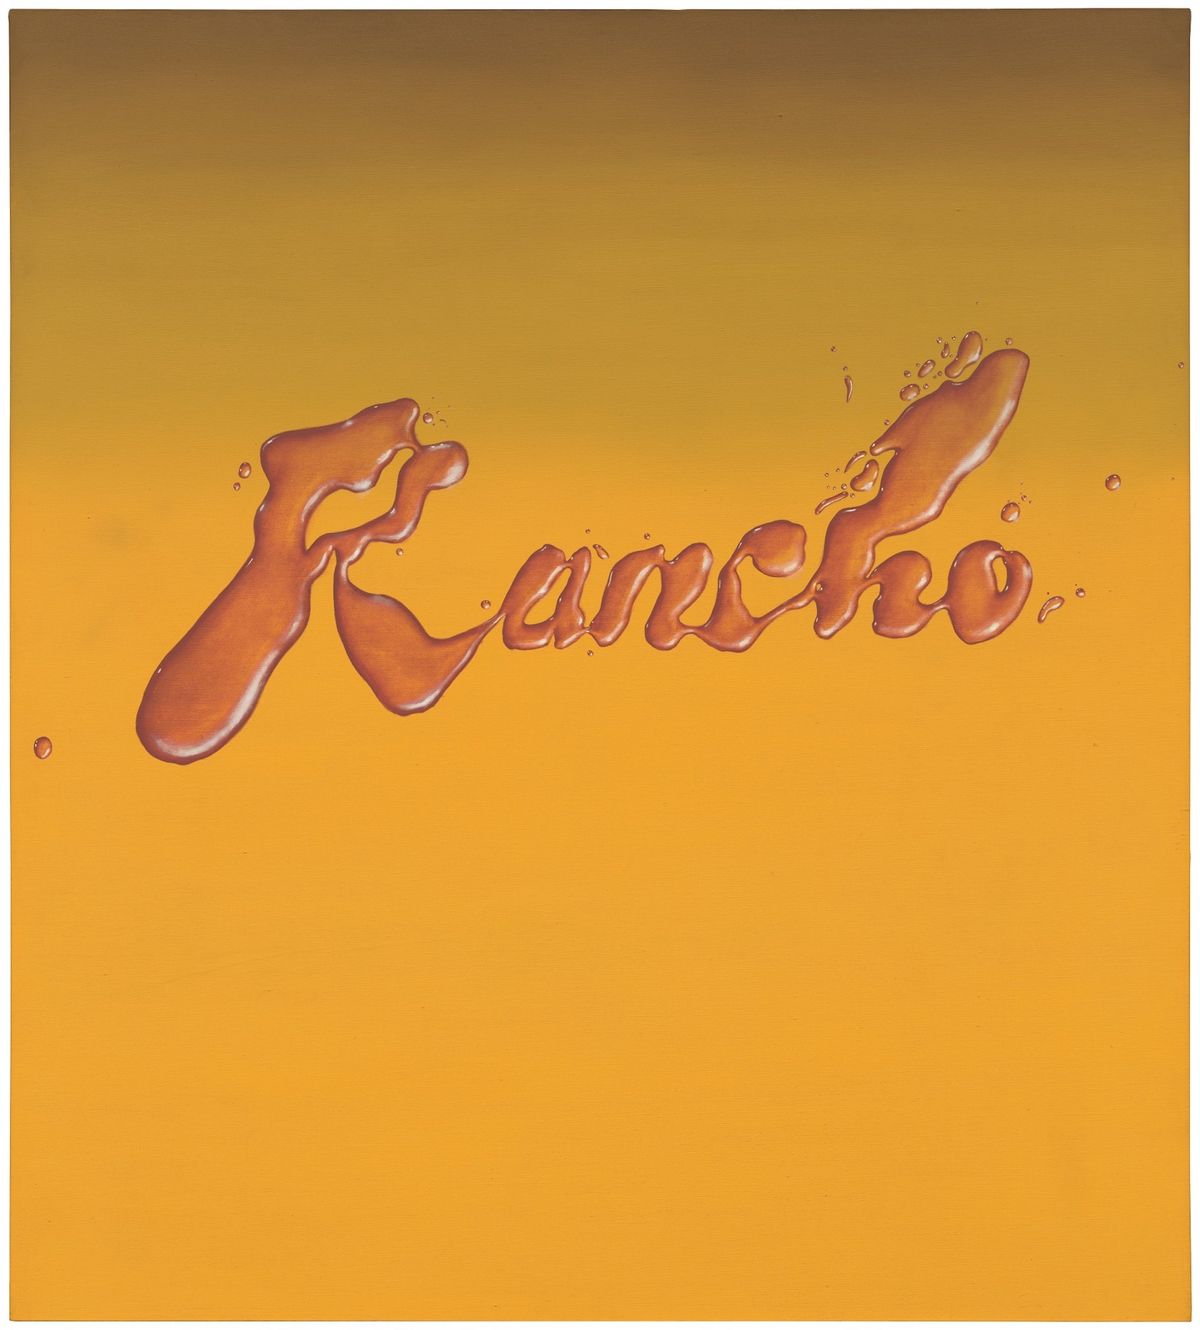 Ed Ruscha, Rancho, 1968. The Museum of Modern Art, New York, gift of Steven and Alexandra Cohen. © 2023 Ed Ruscha. The Museum of Modern Art, New York, Department of Imaging Services, photo Emile Askey